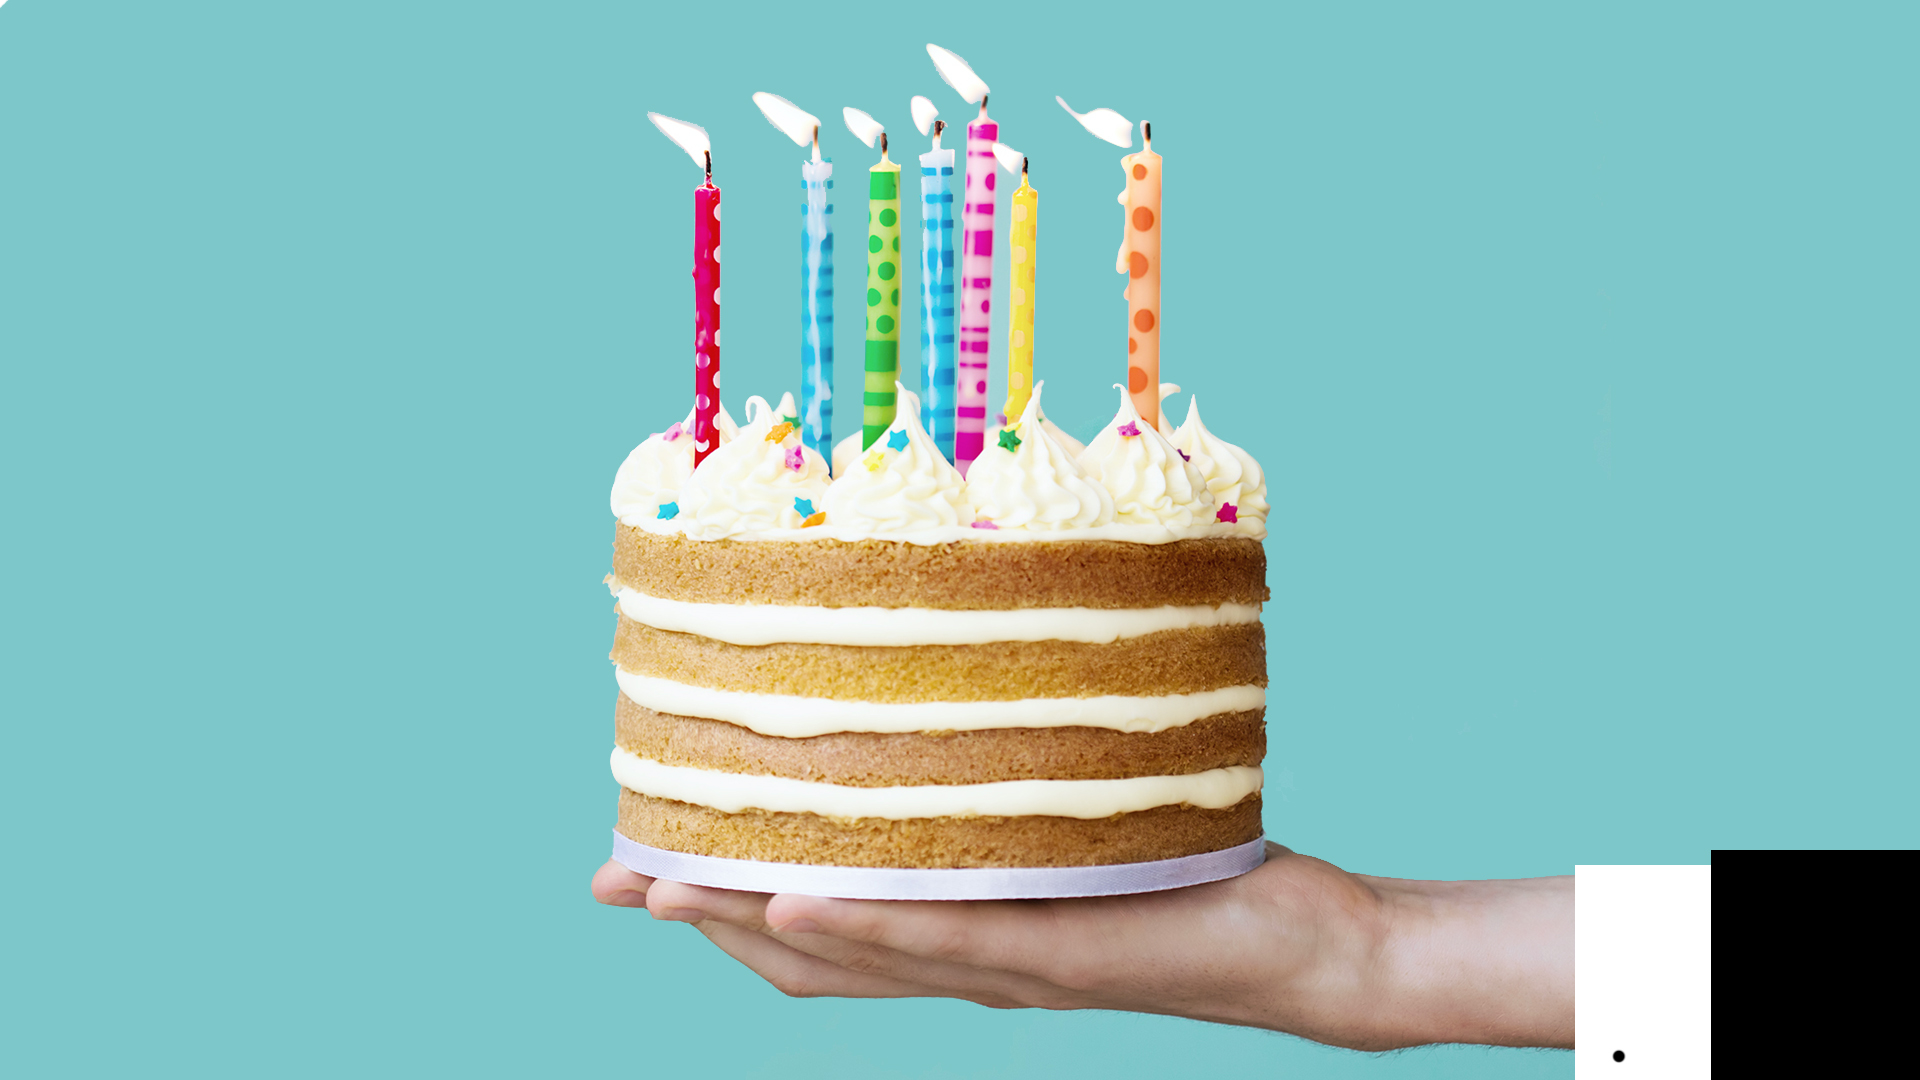 A person holding a delicious birthday cake